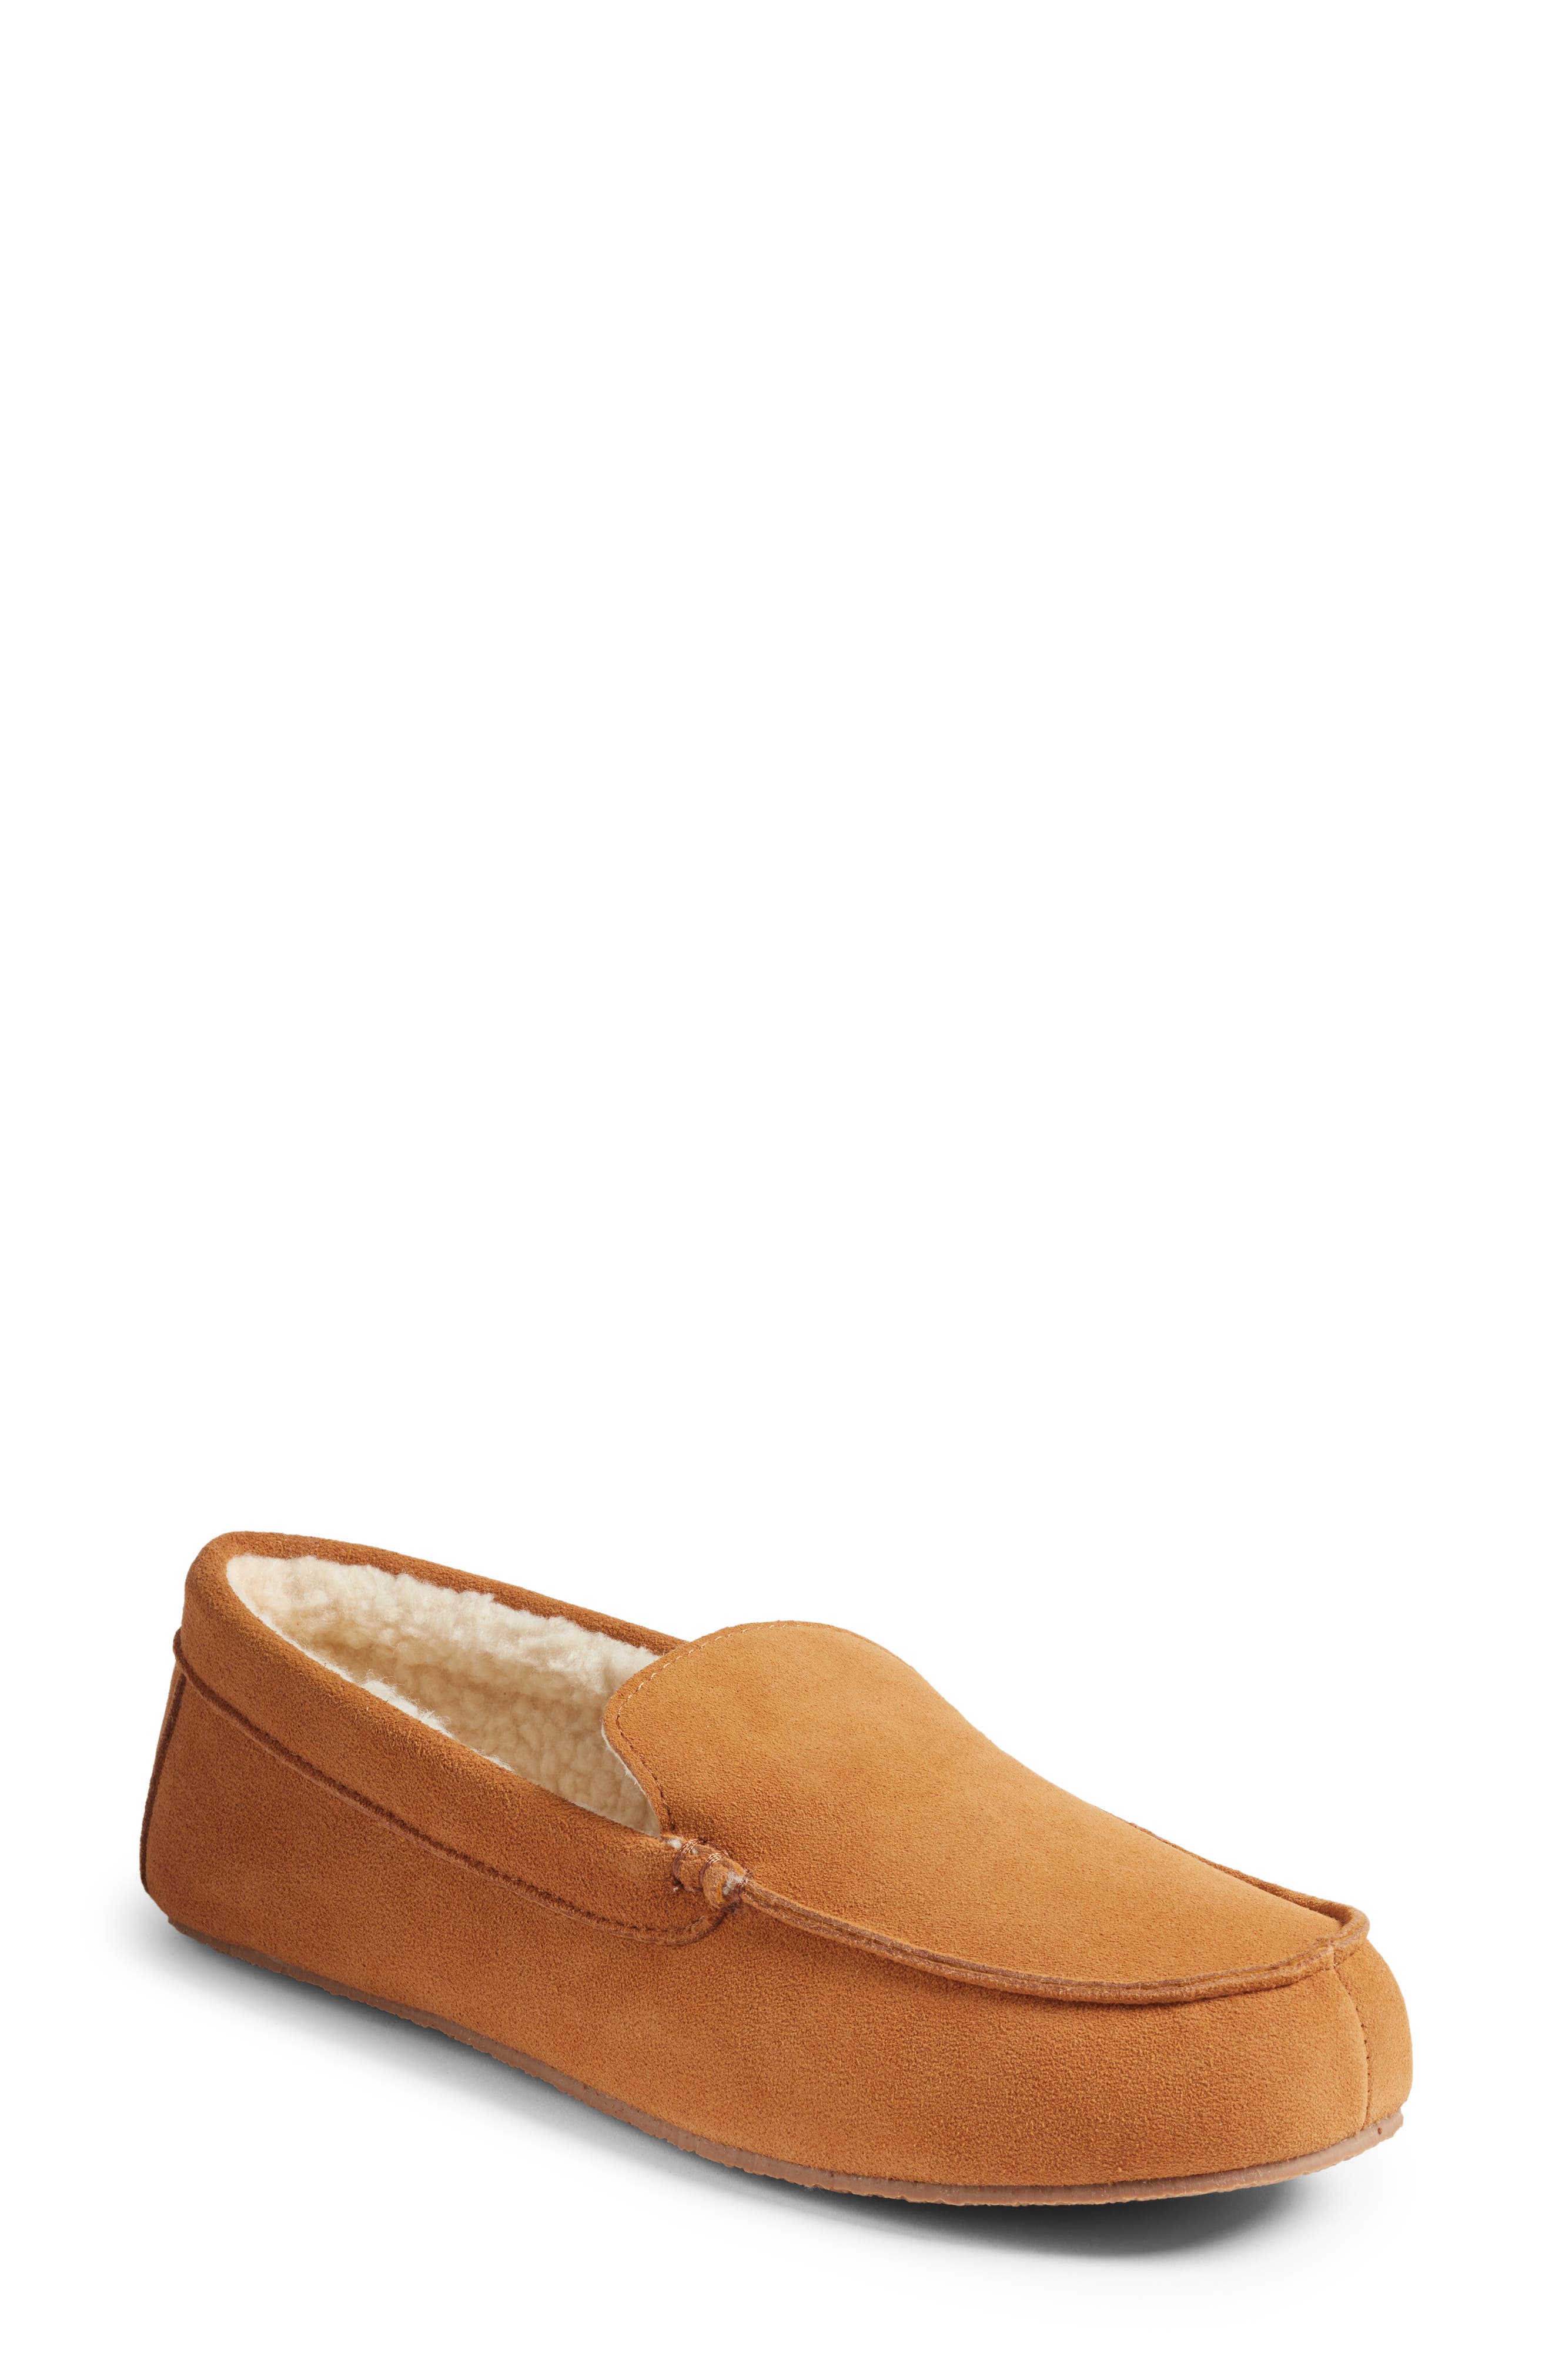 suede moccasin slippers